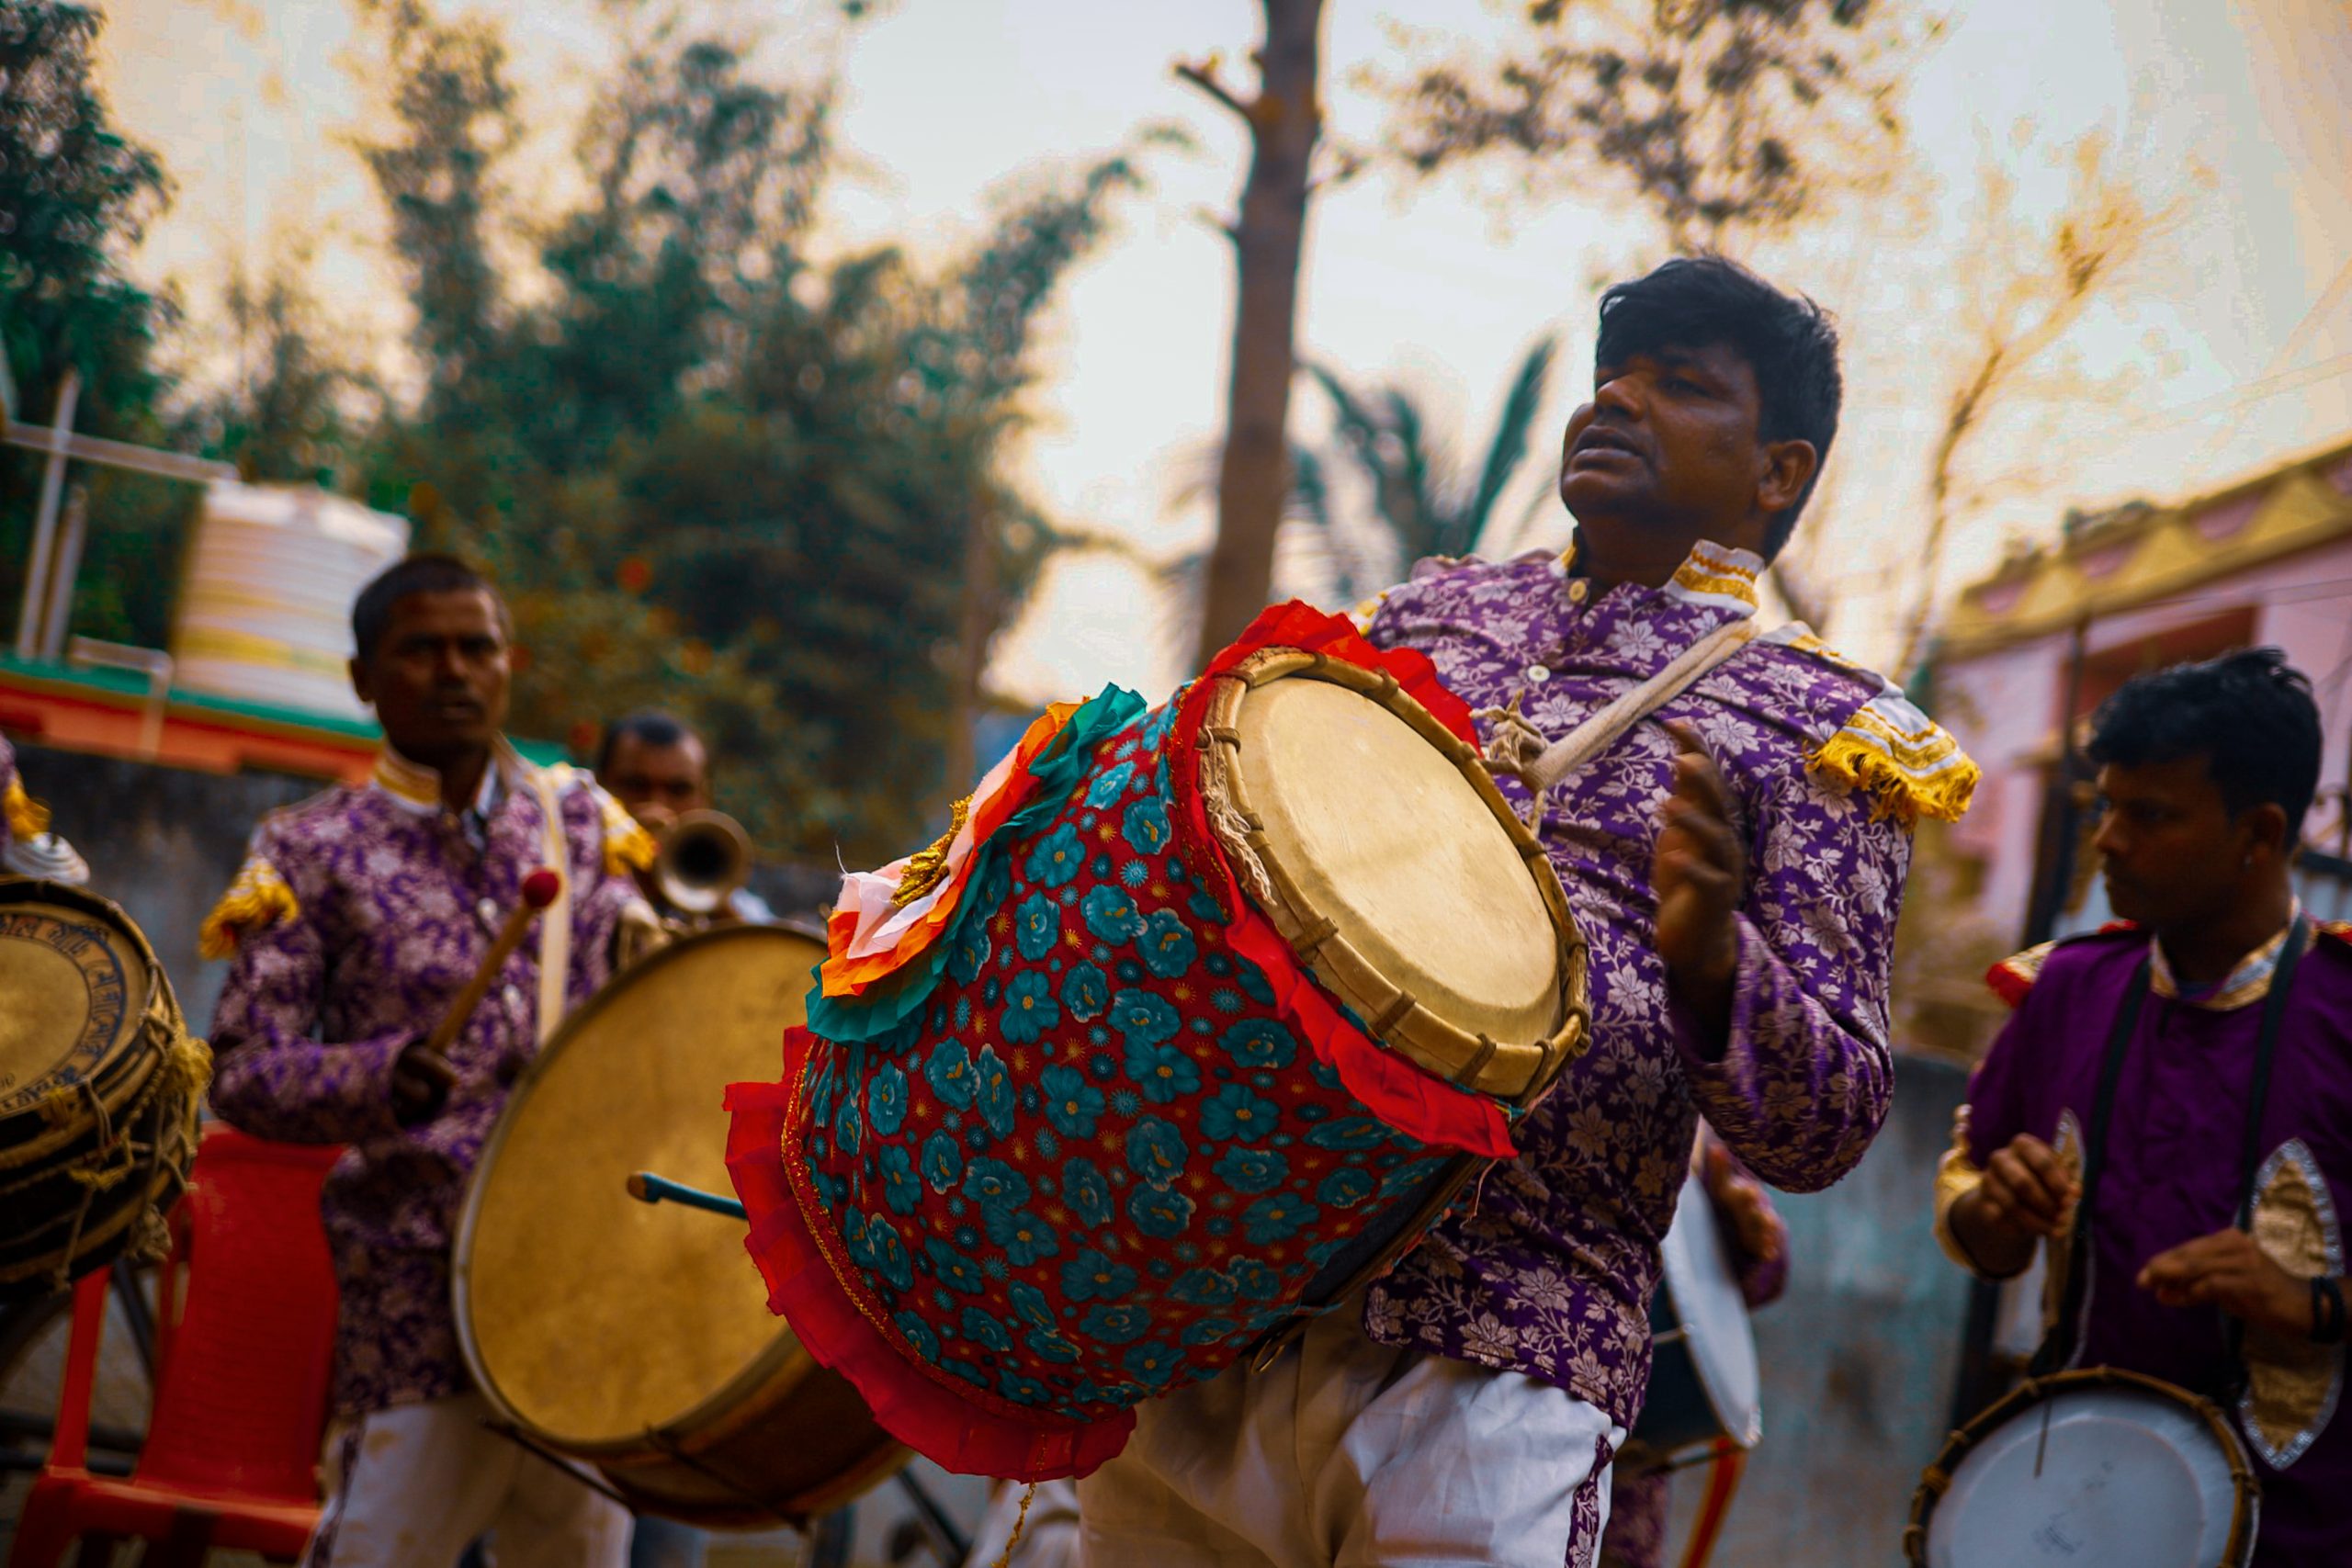 Drummer beating drums in a band parade